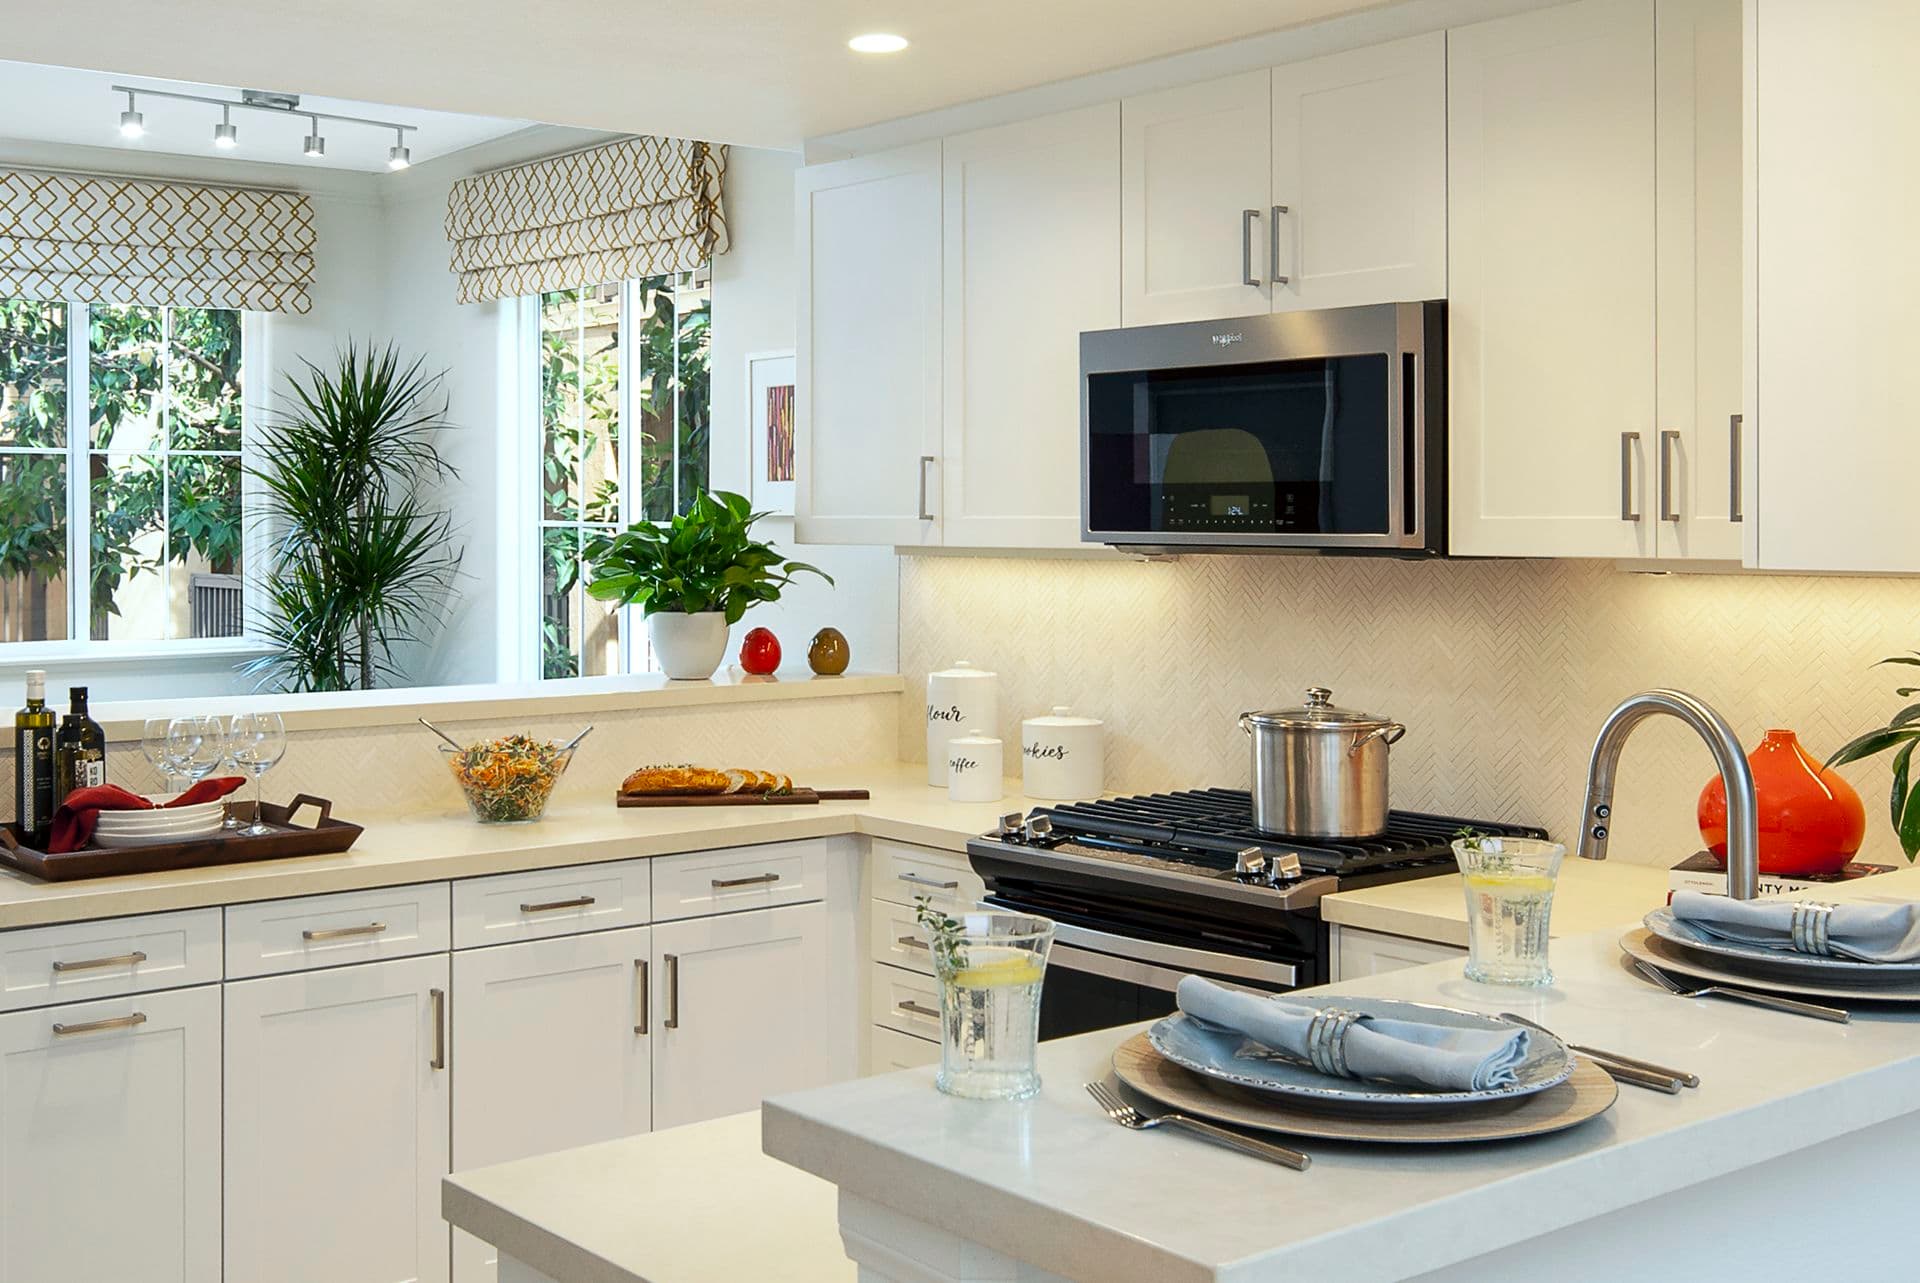 View of kitchen at Torrey Ridge Apartment Homes in Carmel Valley, CA.